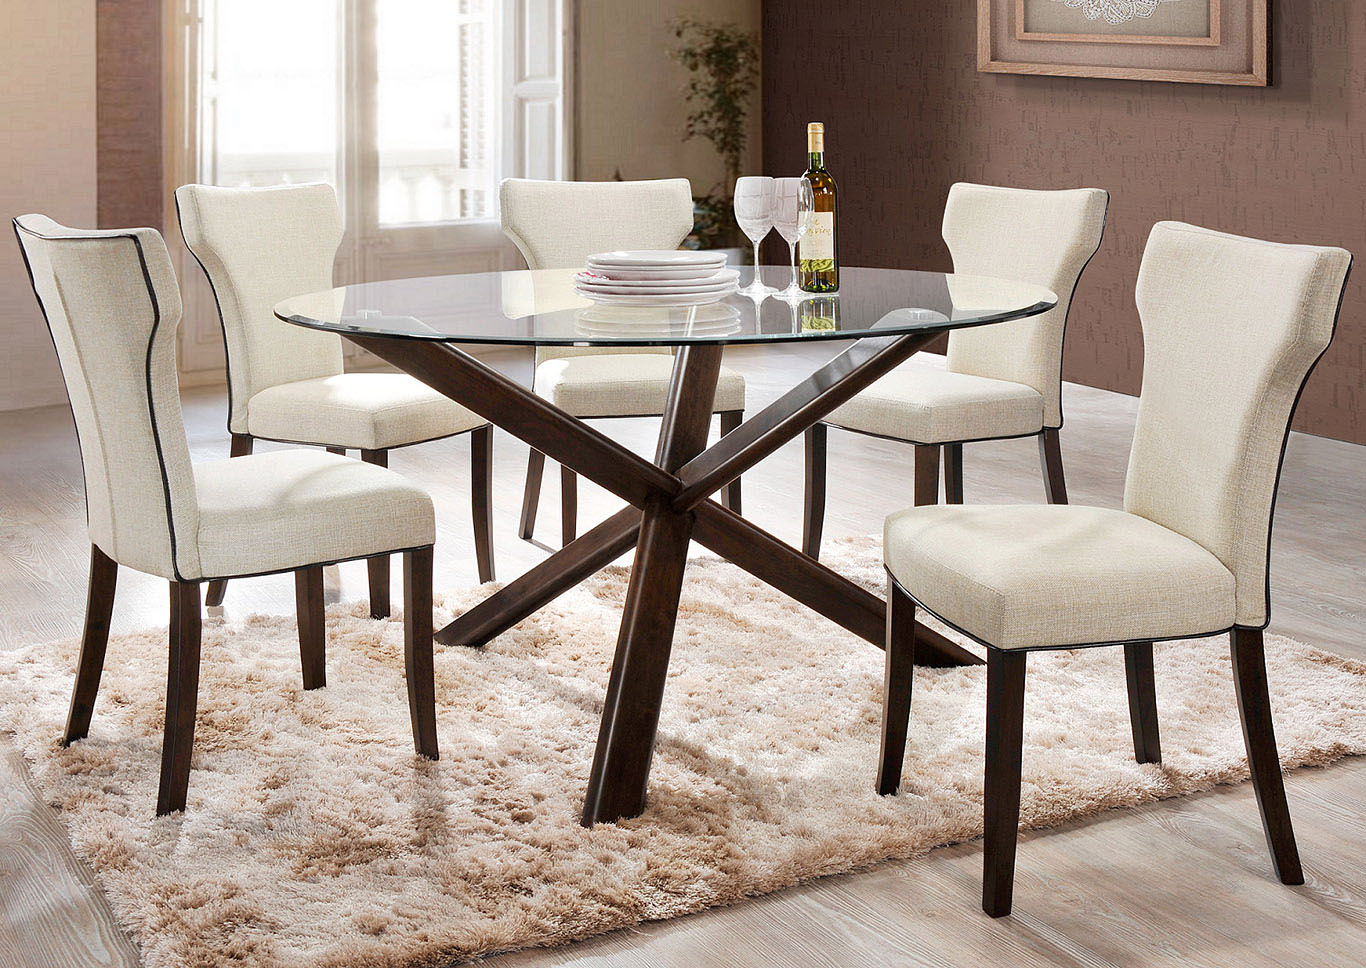 Davis Dining Table w/4 Side Chairs,Chintaly Imports